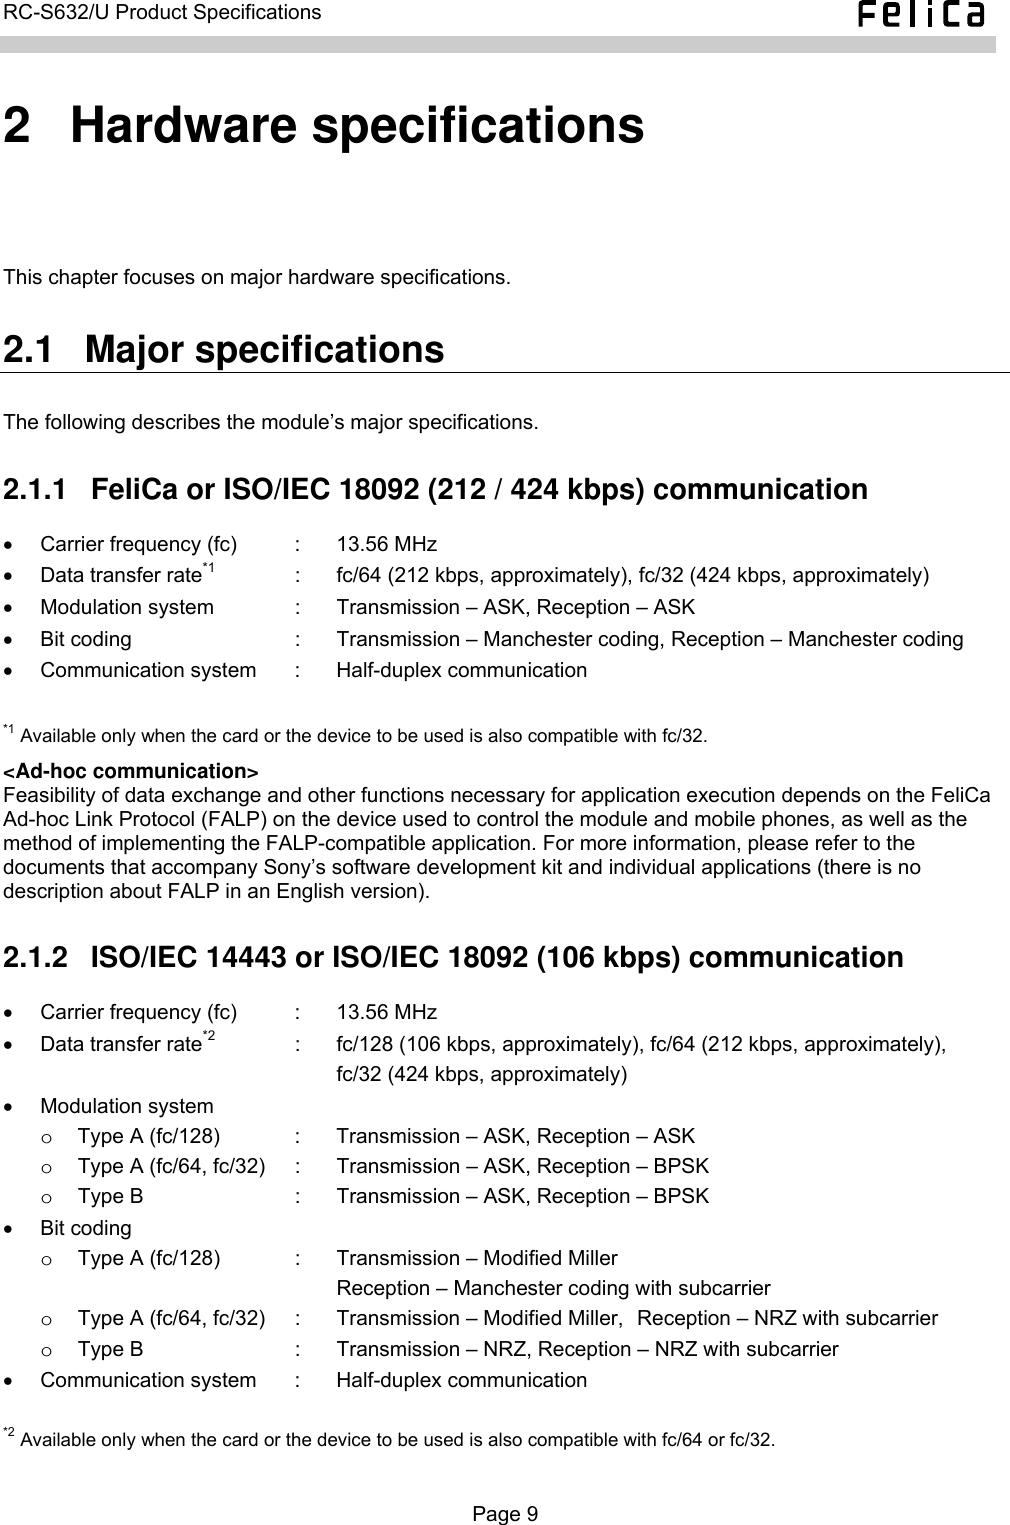   RC-S632/U Product Specifications  2  Hardware specifications This chapter focuses on major hardware specifications. 2.1  Major specifications The following describes the module’s major specifications. 2.1.1  FeliCa or ISO/IEC 18092 (212 / 424 kbps) communication •  Carrier frequency (fc)  :  13.56 MHz •  Data transfer rate*1  :  fc/64 (212 kbps, approximately), fc/32 (424 kbps, approximately) • Modulation system  :  Transmission – ASK, Reception – ASK •  Bit coding  :  Transmission – Manchester coding, Reception – Manchester coding •  Communication system  :  Half-duplex communication  *1 Available only when the card or the device to be used is also compatible with fc/32. &lt;Ad-hoc communication&gt; Feasibility of data exchange and other functions necessary for application execution depends on the FeliCa Ad-hoc Link Protocol (FALP) on the device used to control the module and mobile phones, as well as the method of implementing the FALP-compatible application. For more information, please refer to the documents that accompany Sony’s software development kit and individual applications (there is no description about FALP in an English version). 2.1.2  ISO/IEC 14443 or ISO/IEC 18092 (106 kbps) communication •  Carrier frequency (fc)  :  13.56 MHz •  Data transfer rate*2  :  fc/128 (106 kbps, approximately), fc/64 (212 kbps, approximately),       fc/32 (424 kbps, approximately) • Modulation system o  Type A (fc/128)  :  Transmission – ASK, Reception – ASK o  Type A (fc/64, fc/32)  :  Transmission – ASK, Reception – BPSK o  Type B  :  Transmission – ASK, Reception – BPSK • Bit coding o  Type A (fc/128)  :  Transmission – Modified Miller      Reception – Manchester coding with subcarrier o  Type A (fc/64, fc/32)  :  Transmission – Modified Miller,  Reception – NRZ with subcarrier o  Type B  :  Transmission – NRZ, Reception – NRZ with subcarrier •  Communication system  :  Half-duplex communication  *2 Available only when the card or the device to be used is also compatible with fc/64 or fc/32.  Page 9  